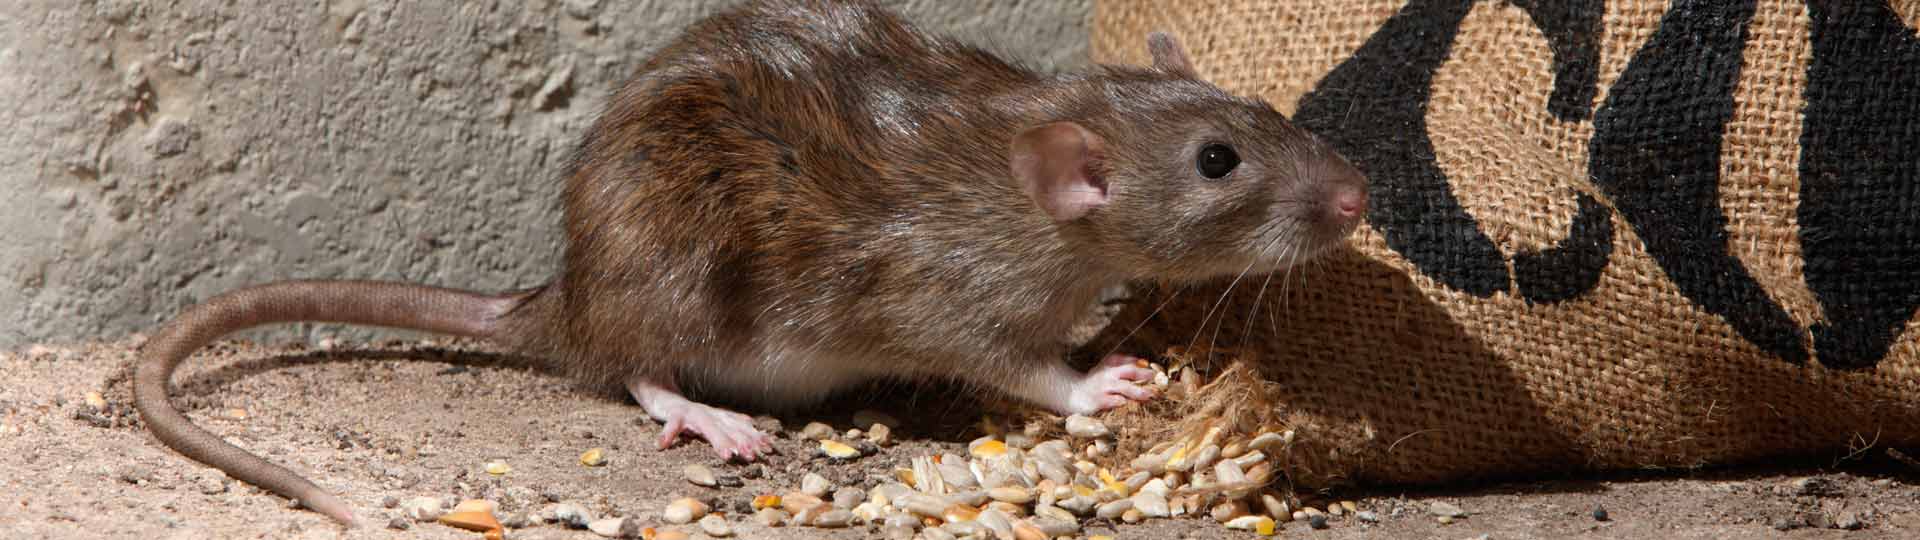 Rodent Control  Toledo Lucas County Health Department